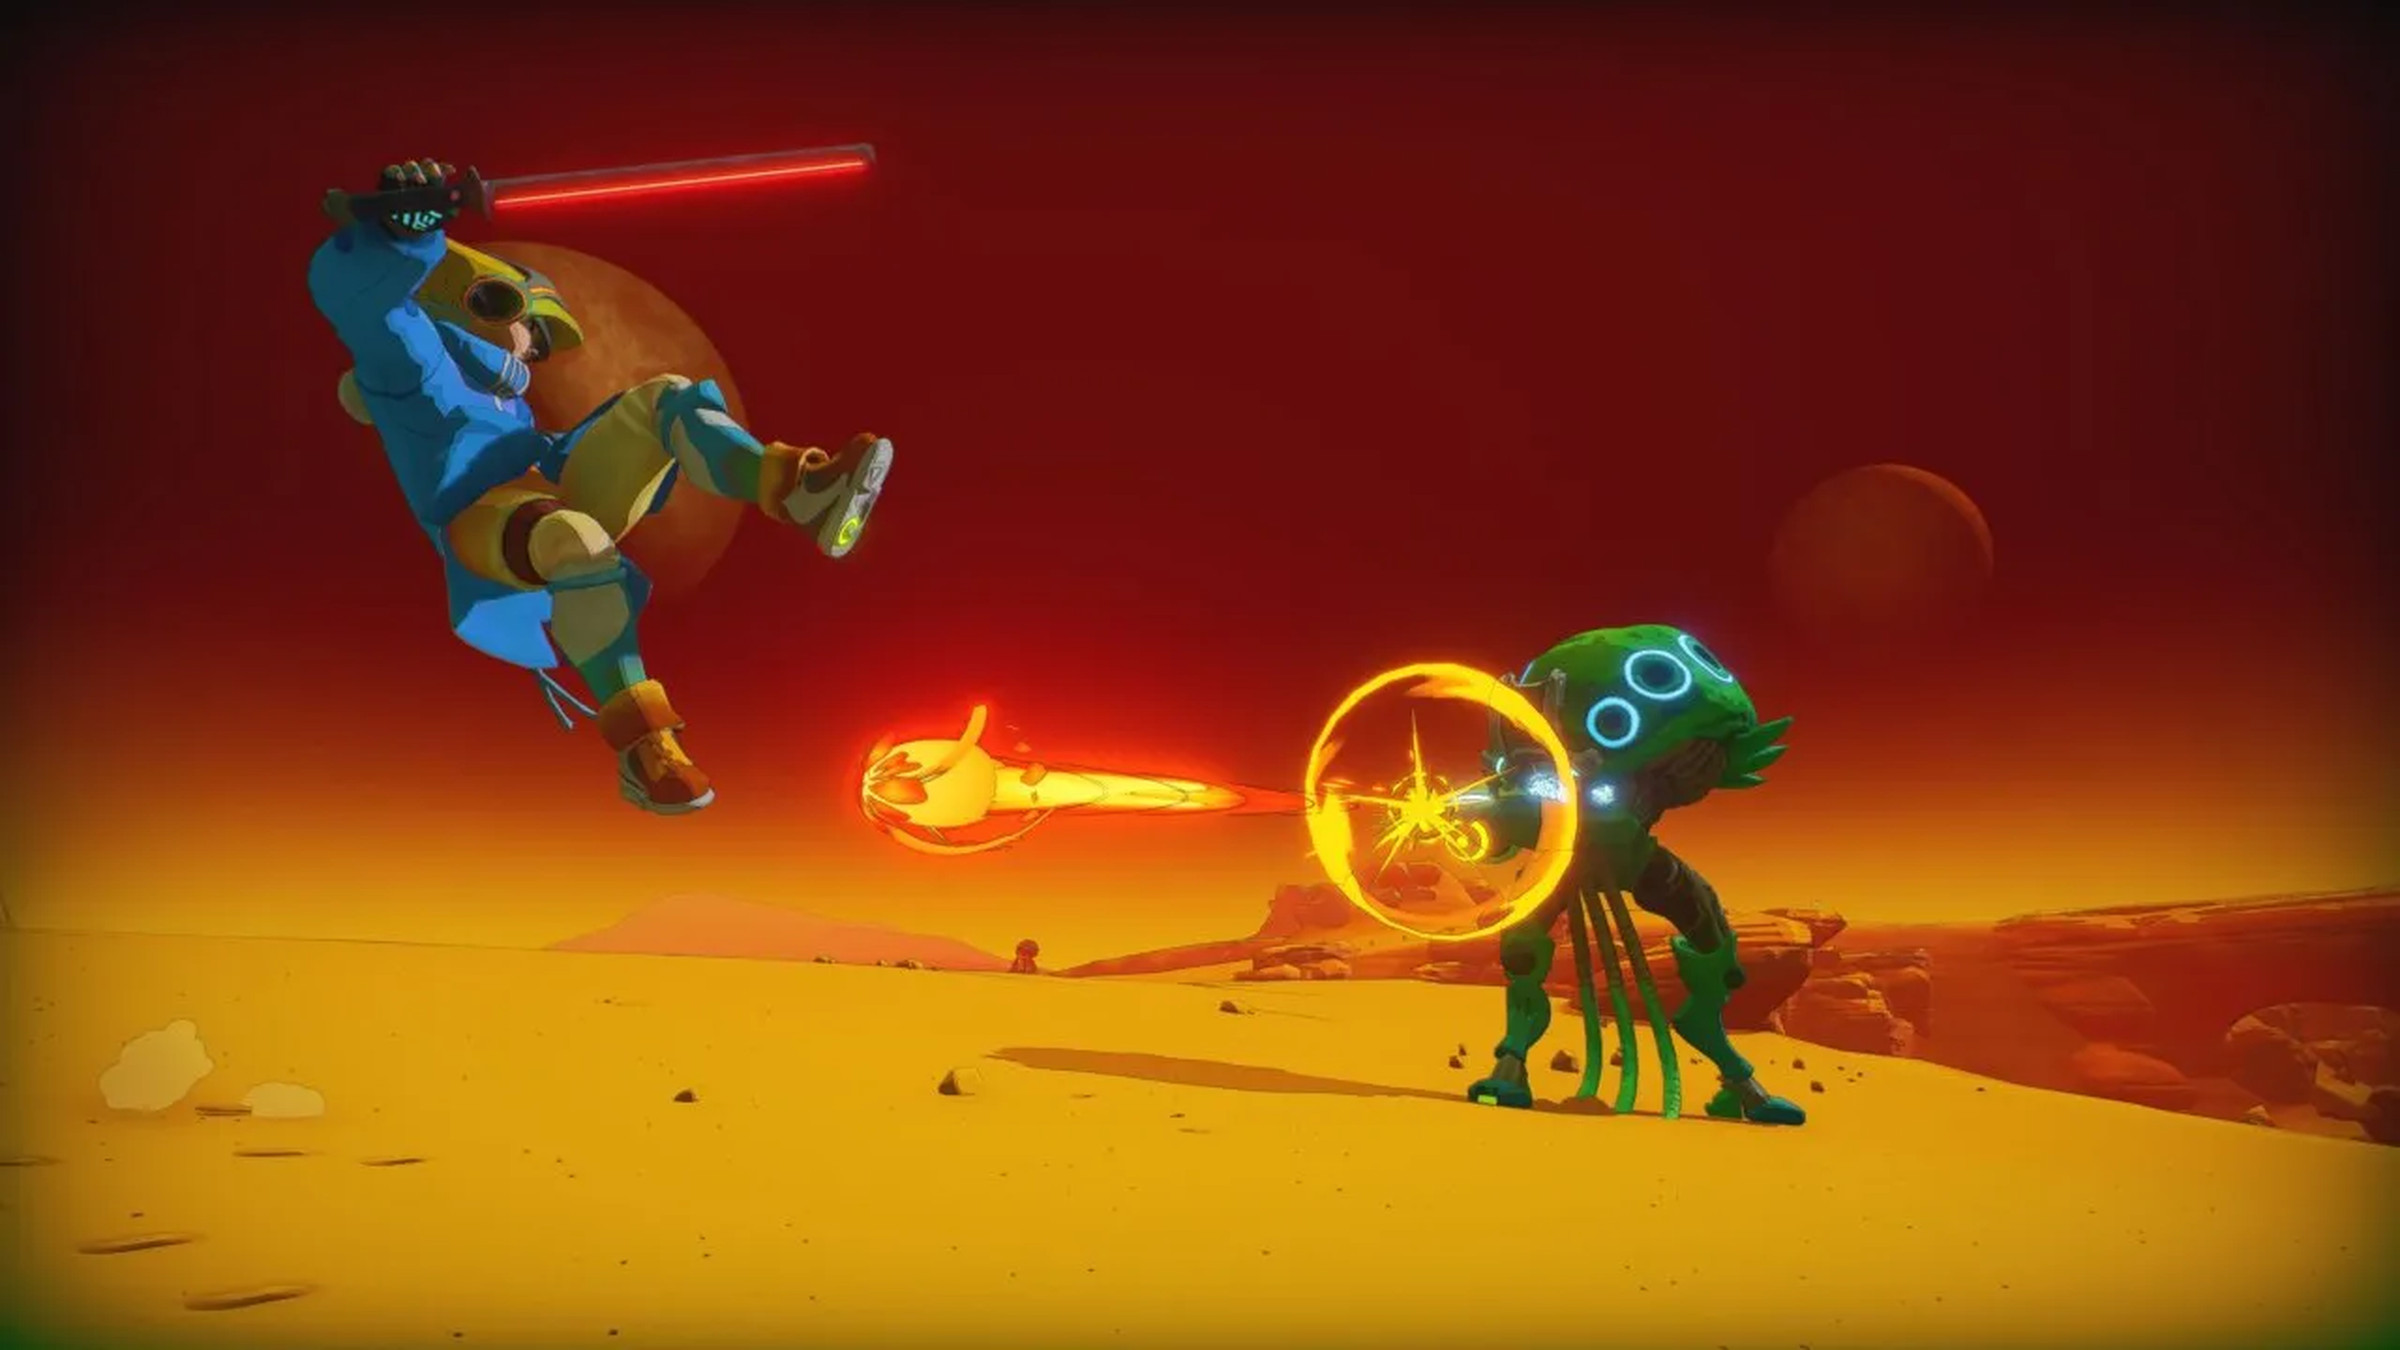 Screenshot from PixelJunk Raiders. A human player dodges laser bolts fired from jellyfish-like creatures against a sandy landscape.